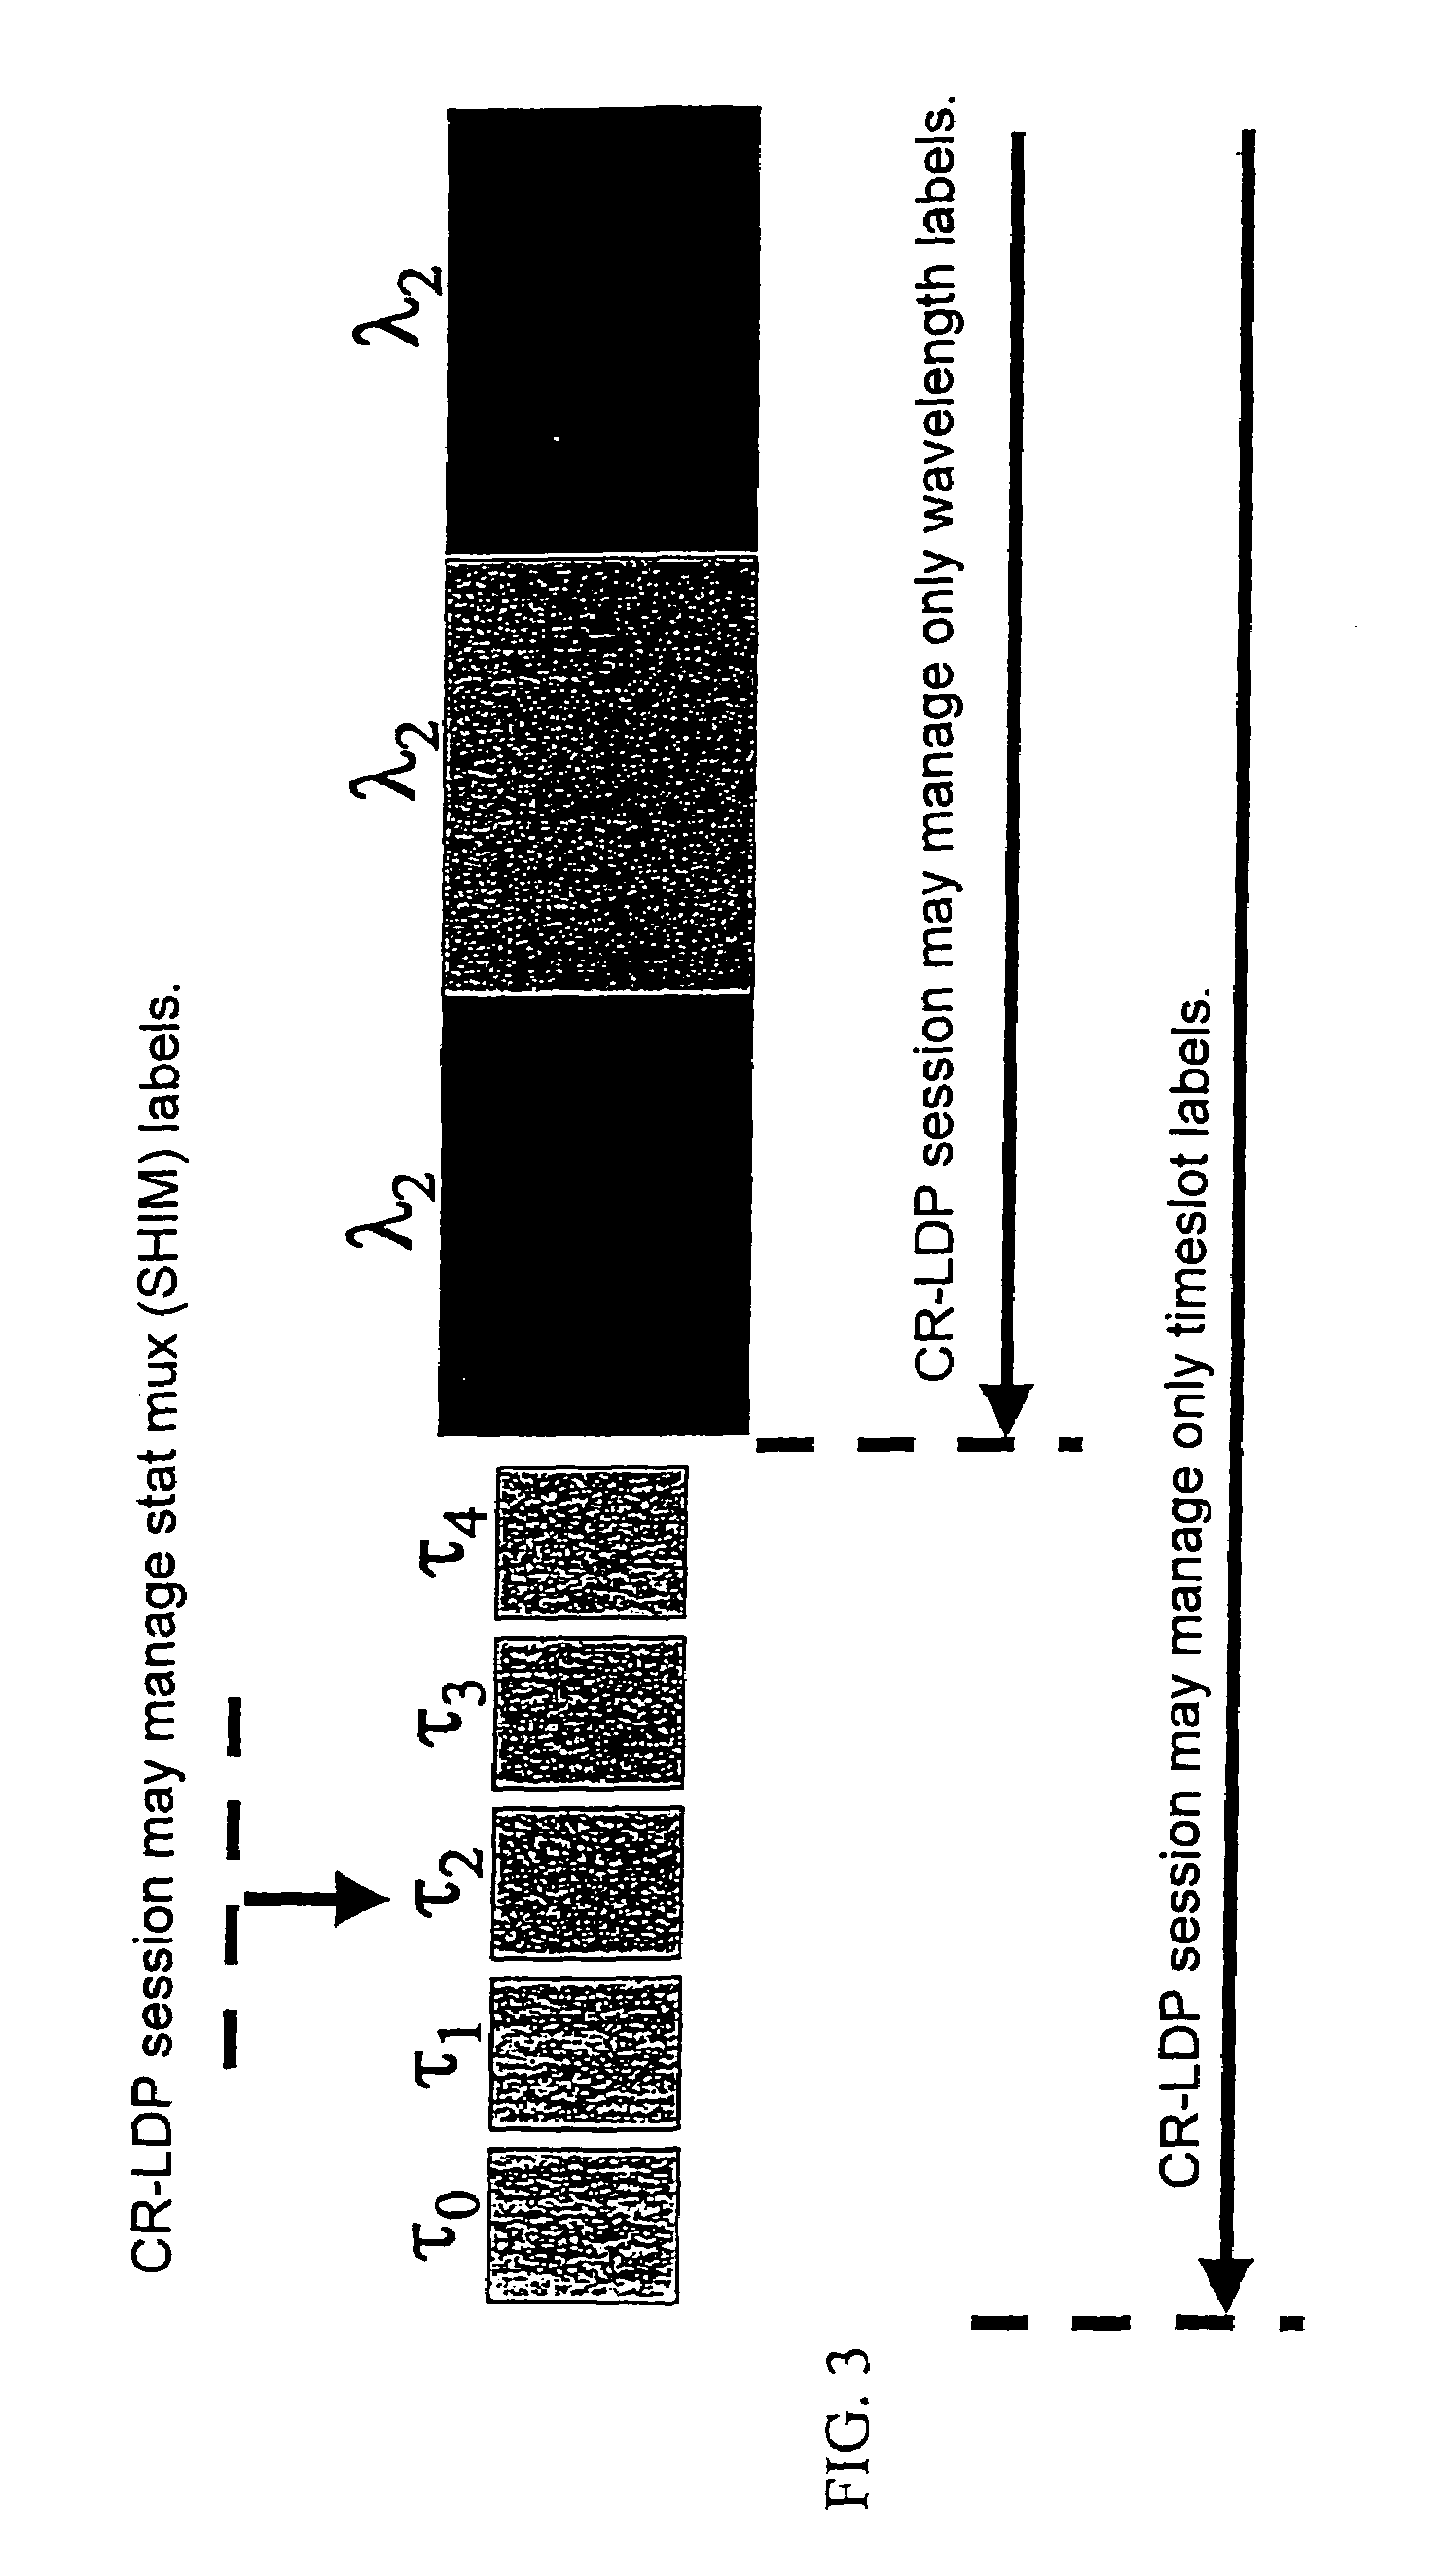 MPLS application to optical cross-connect using wavelength as a label